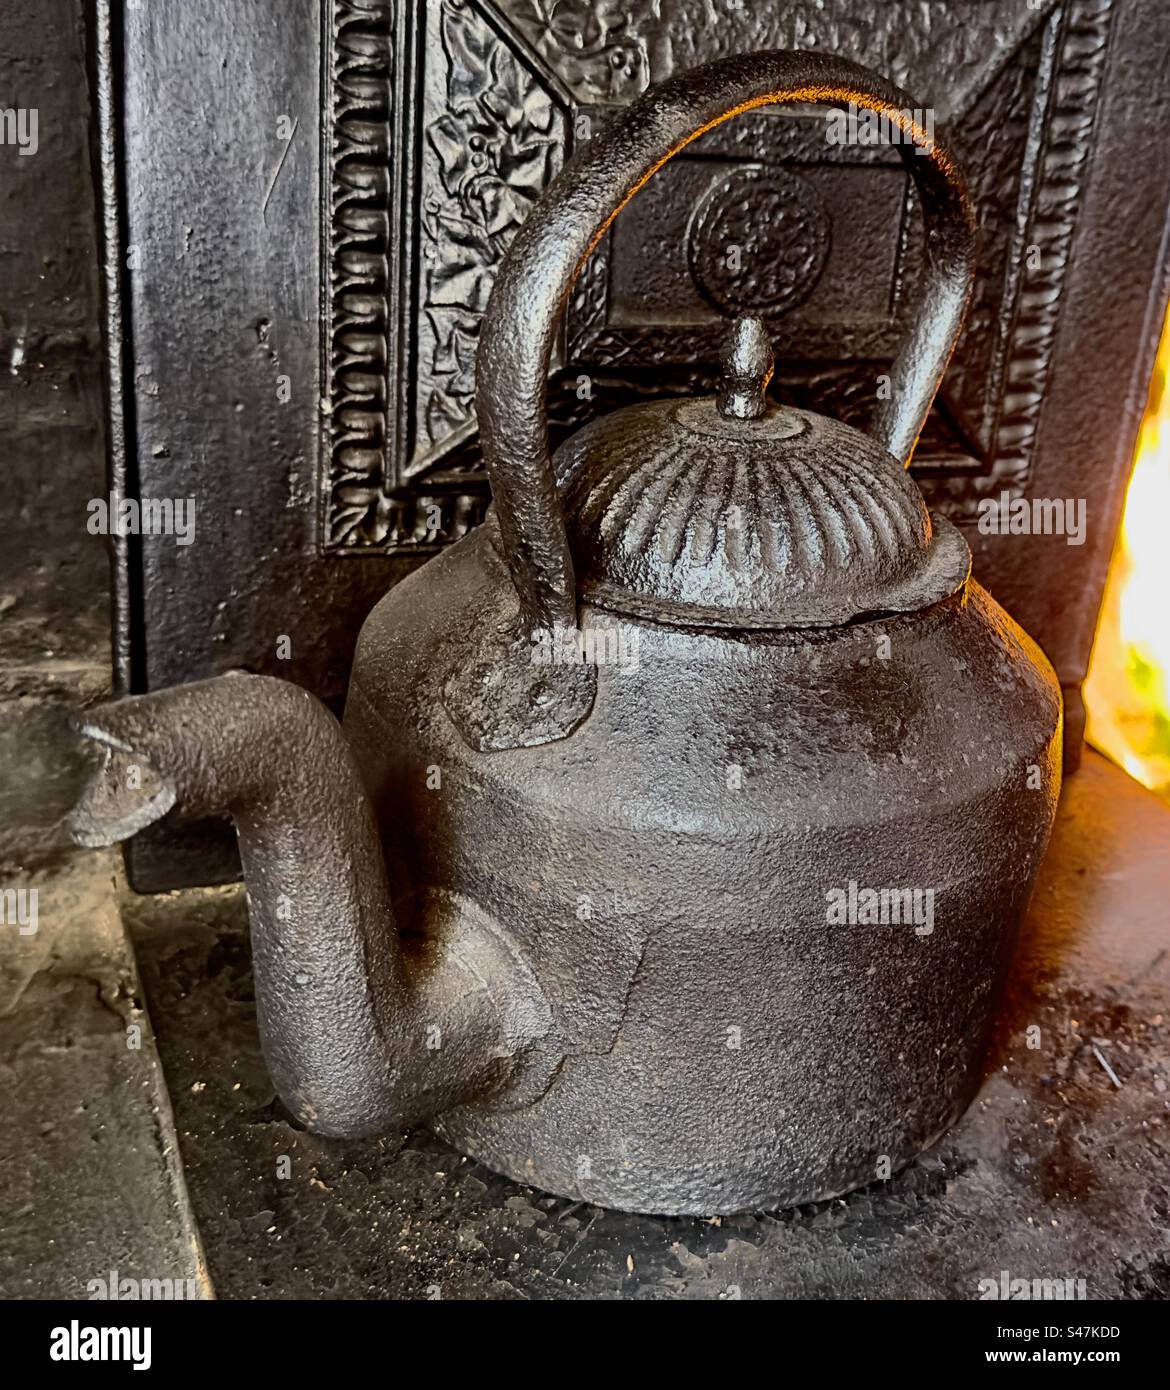 https://c8.alamy.com/comp/S47KDD/a-victorian-cast-iron-kettle-sitting-on-the-hob-is-an-old-kitchen-range-a-roaring-fire-in-the-background-S47KDD.jpg